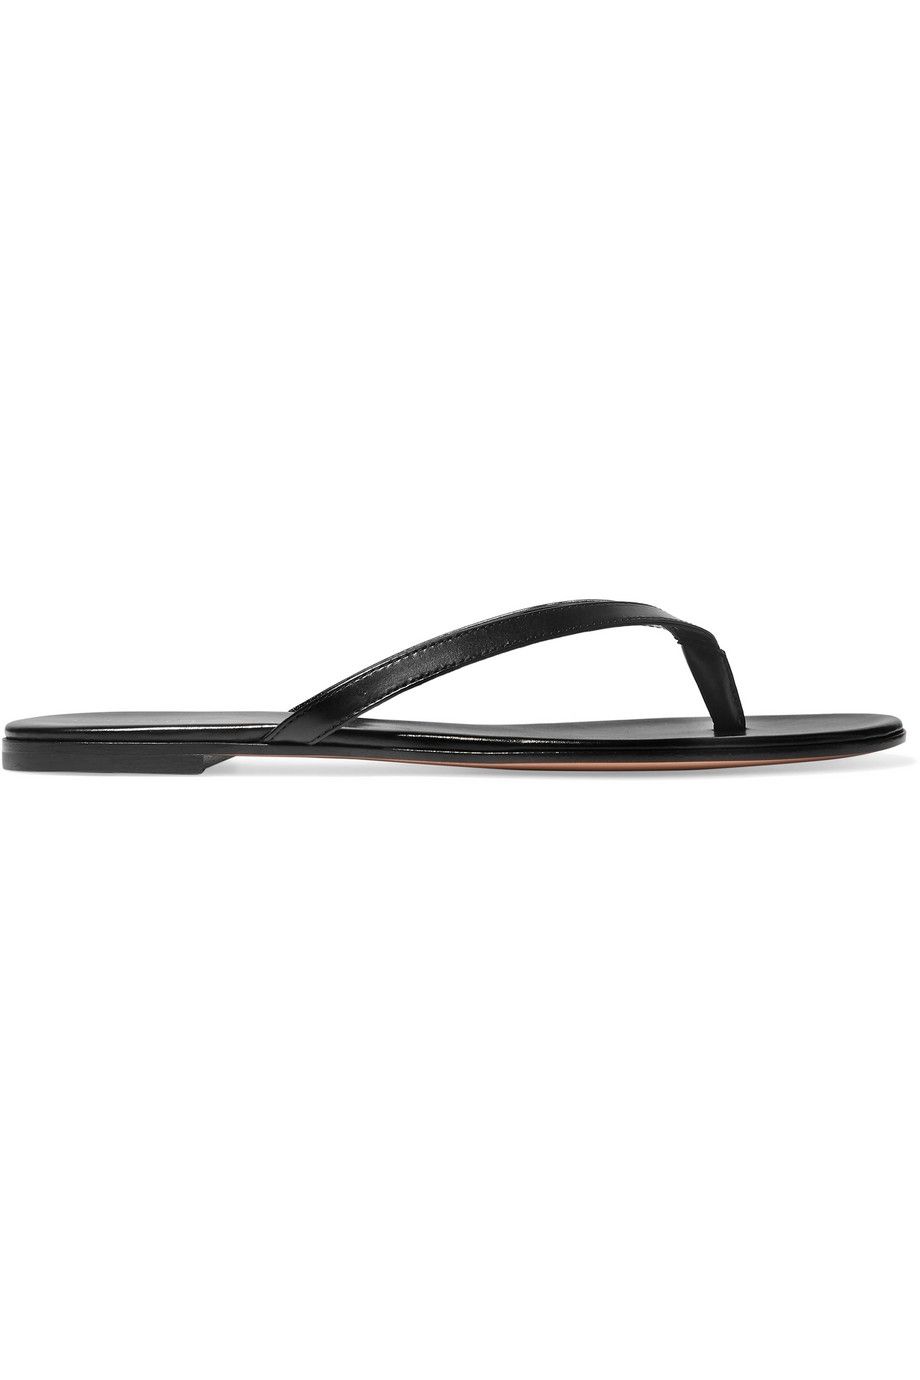 Are You Ready for the Designer Flip Flop Trend?